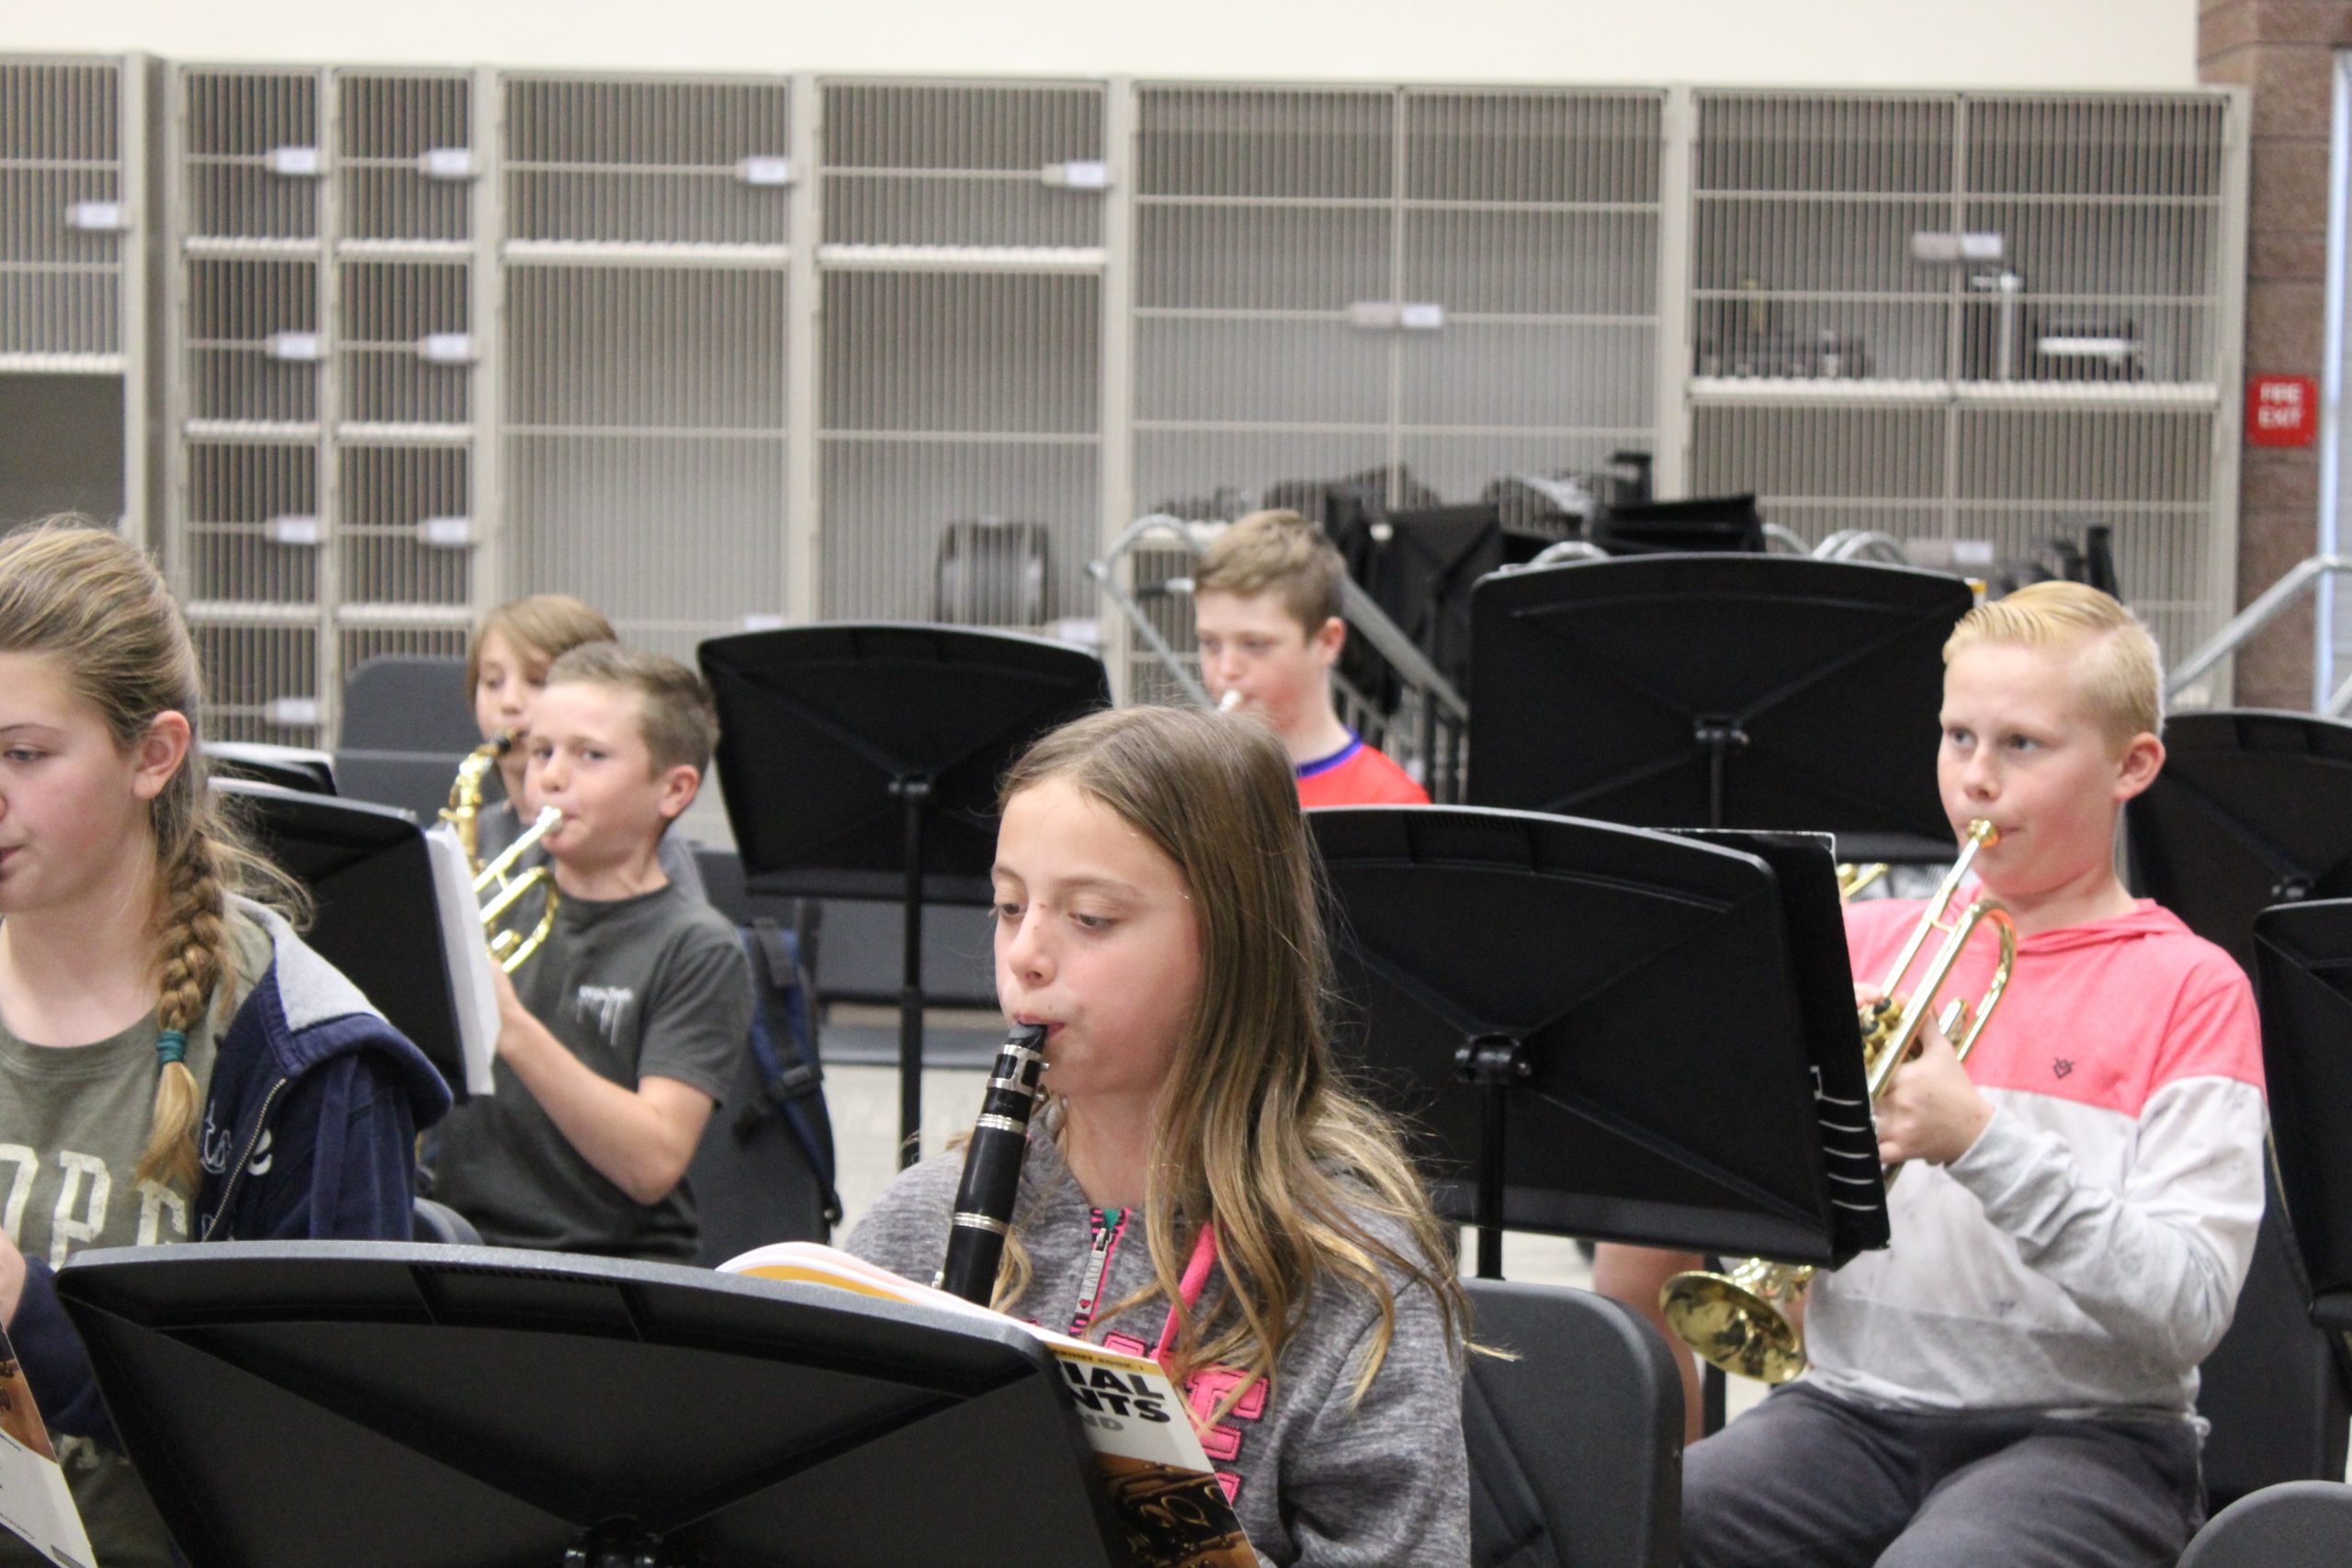 Band students playing instruments 